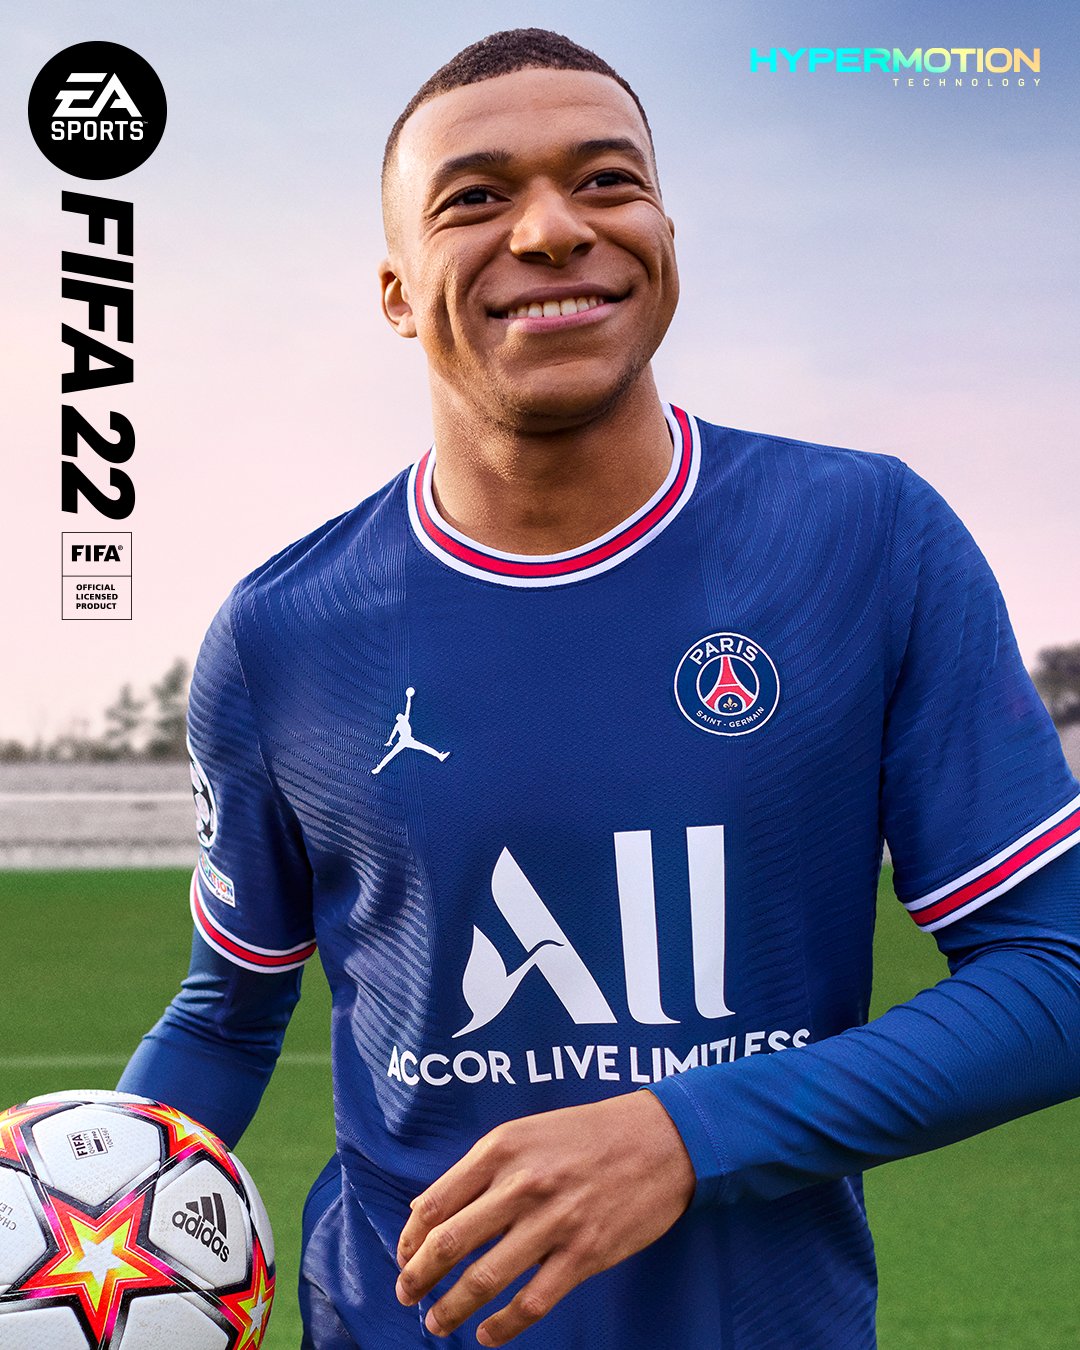 FIFA 22 officially announced; reveal trailer dropping on Sunday - XboxEra